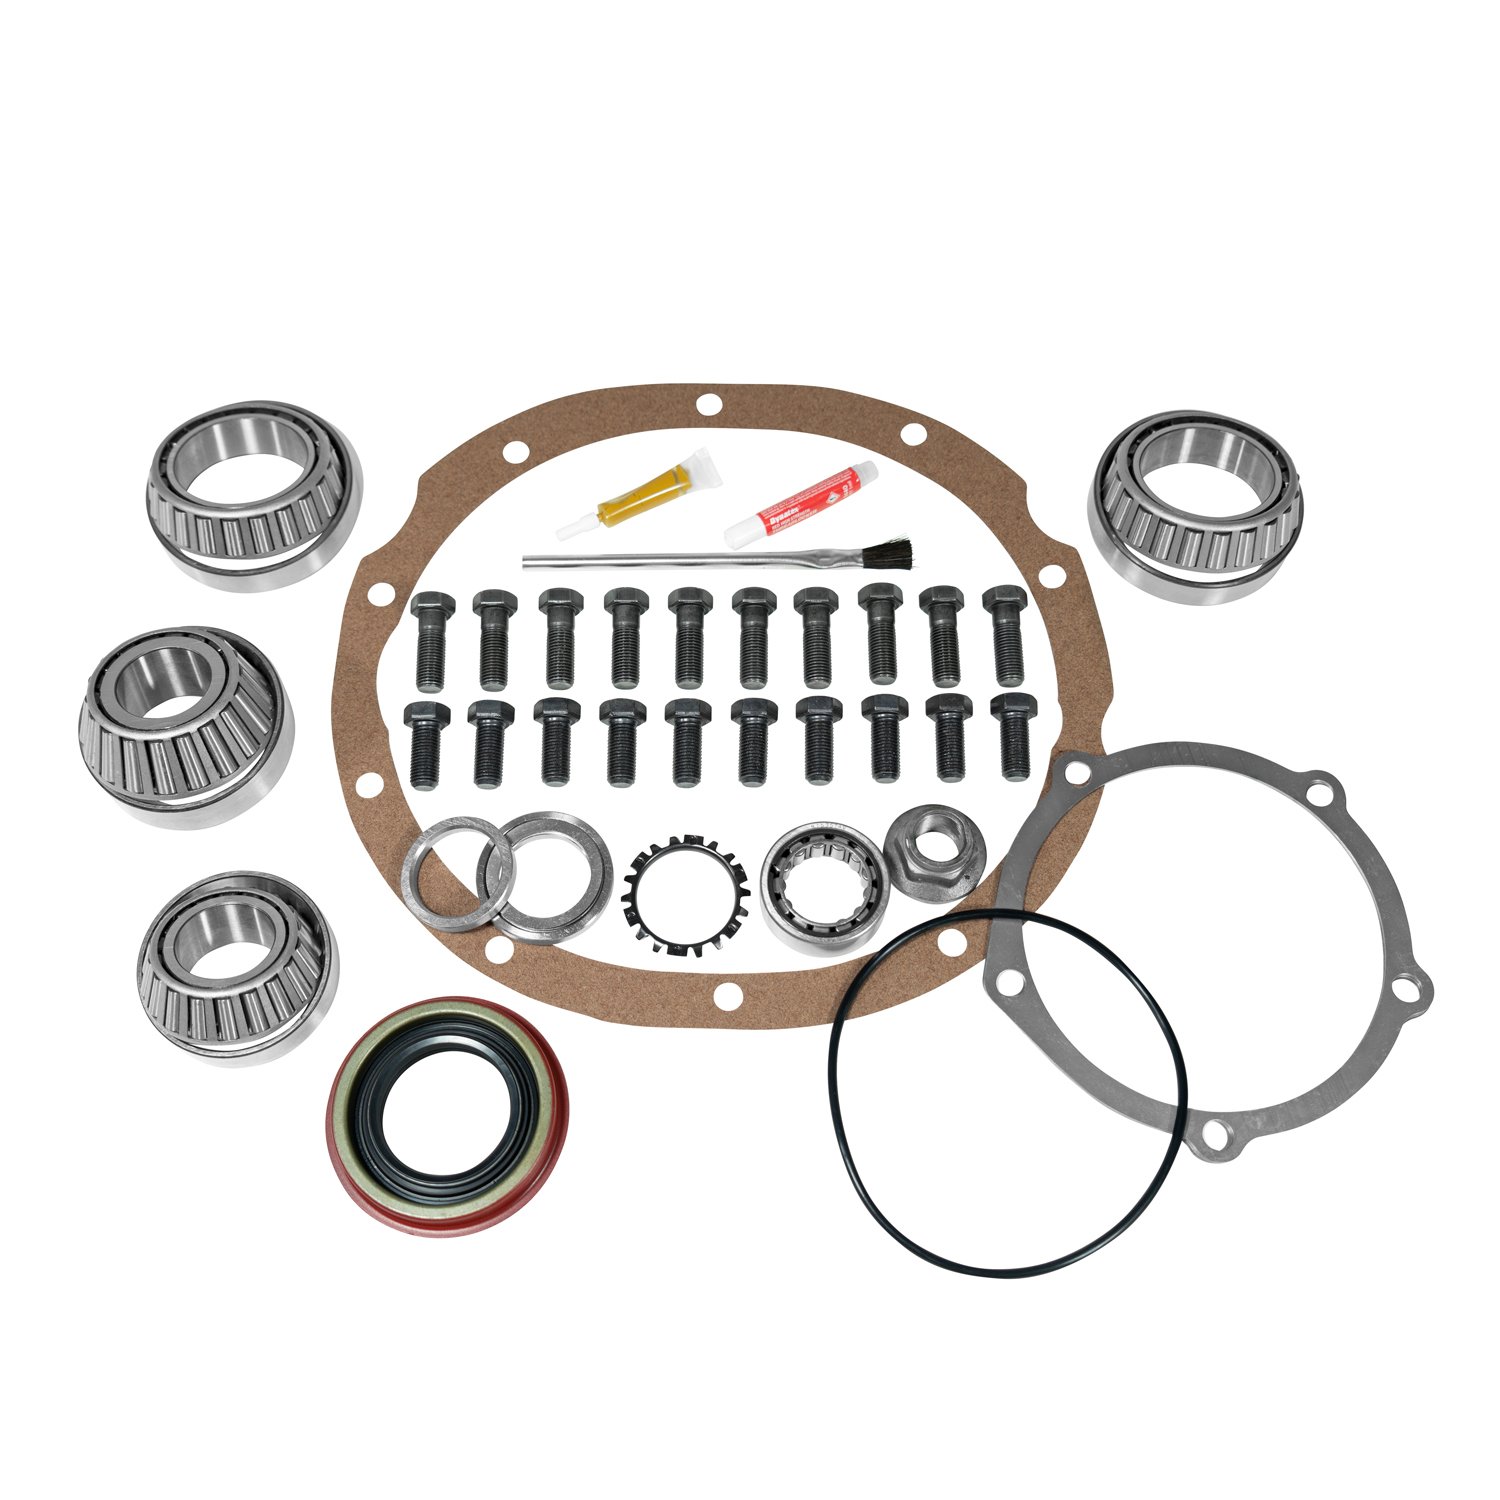 Master Overhaul Kit For Ford 9 in. Lm102910 Diff W/Crush Sleeve Eliminator